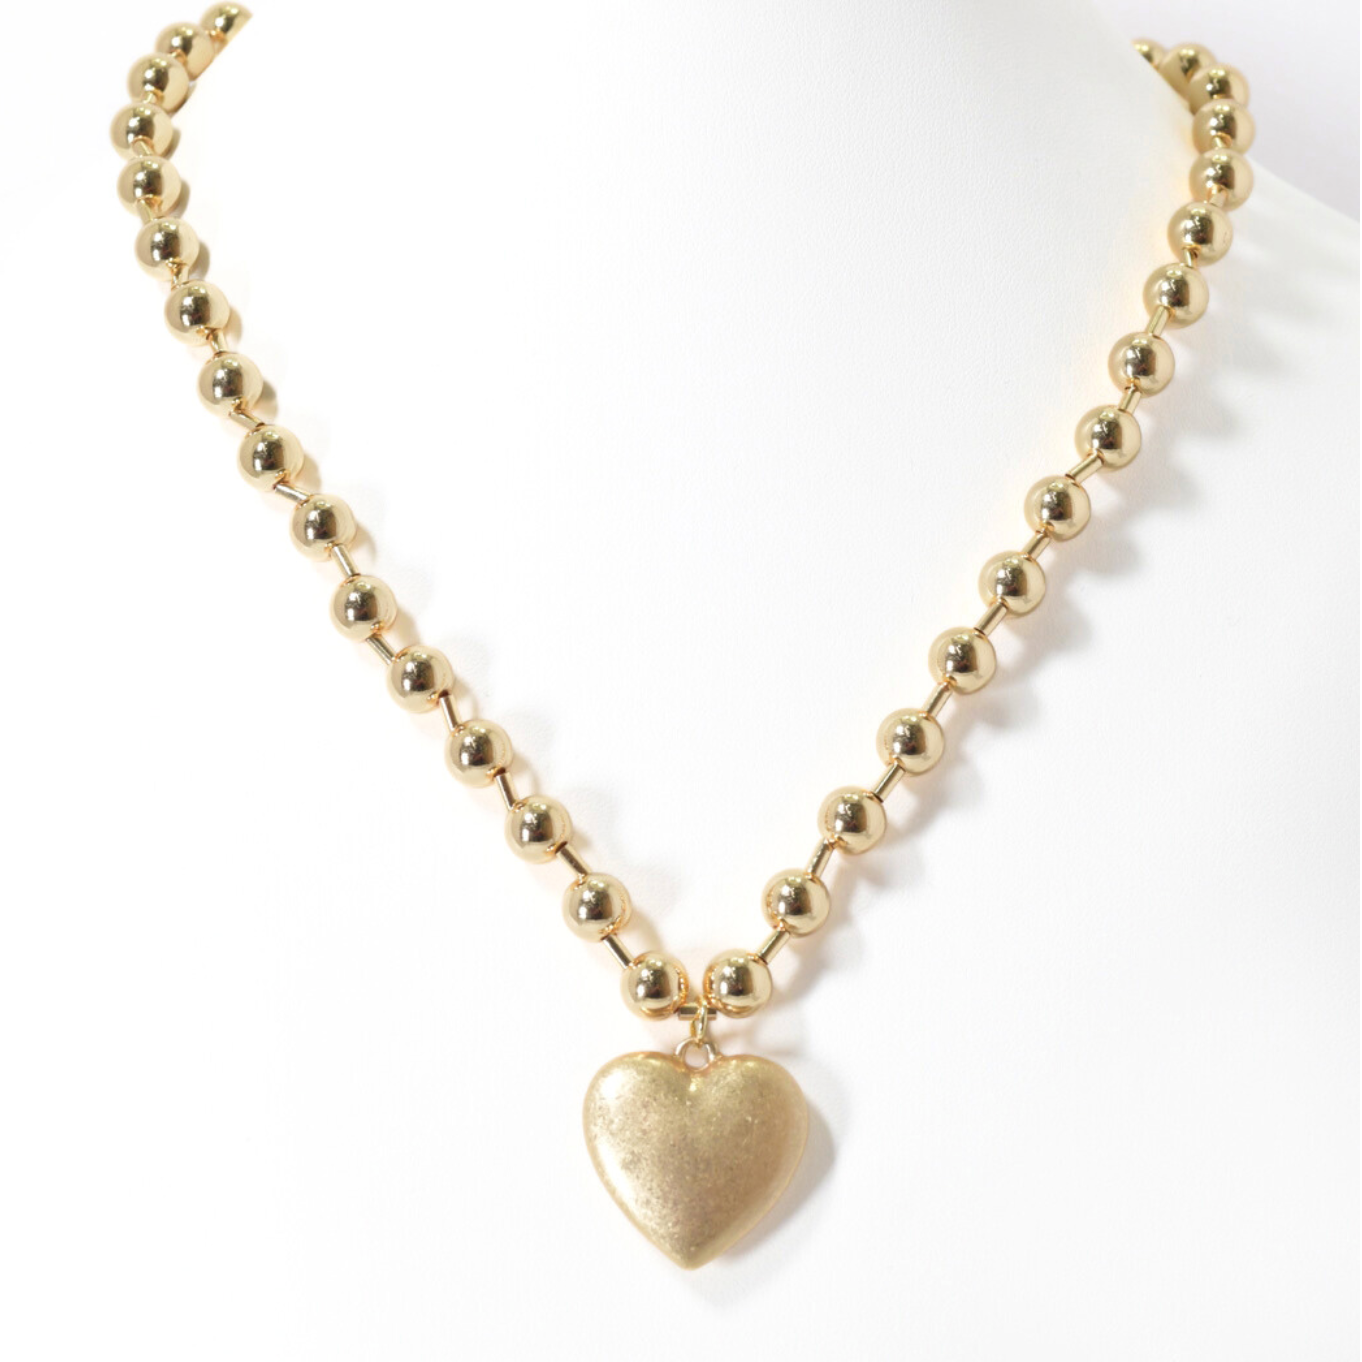 Waverly Worn Gold Heart Charm Necklace